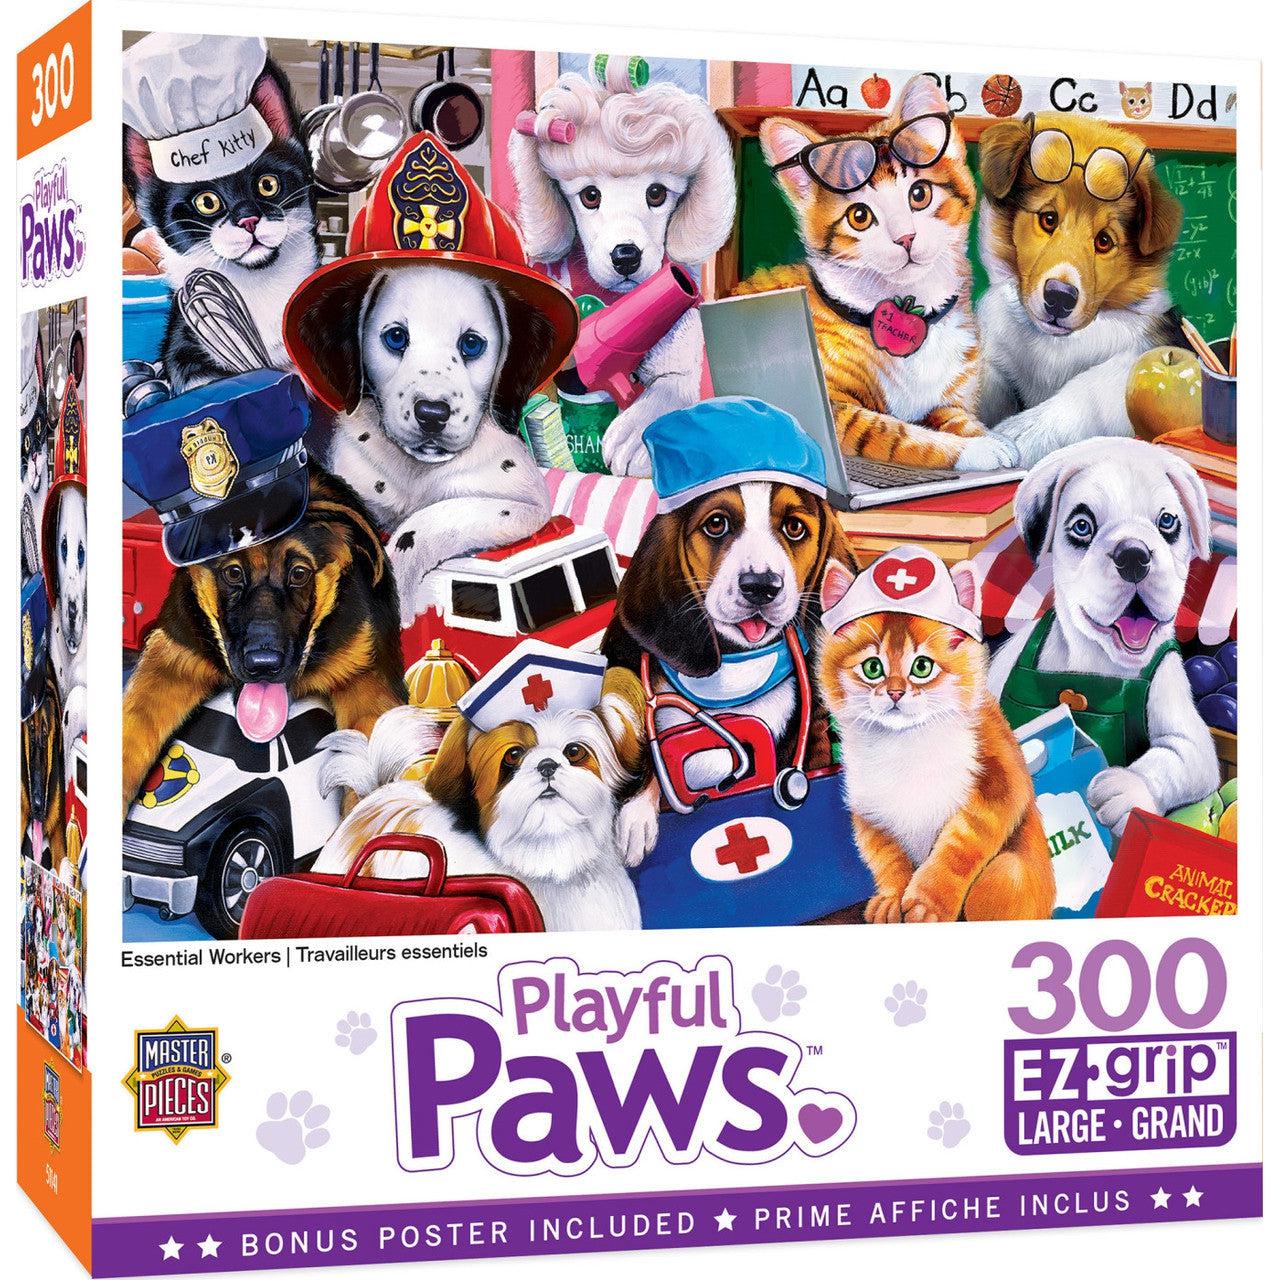 MasterPieces-Playful Paws - Essential Workers - 300 Piece EzGrip Puzzle-32072-Legacy Toys